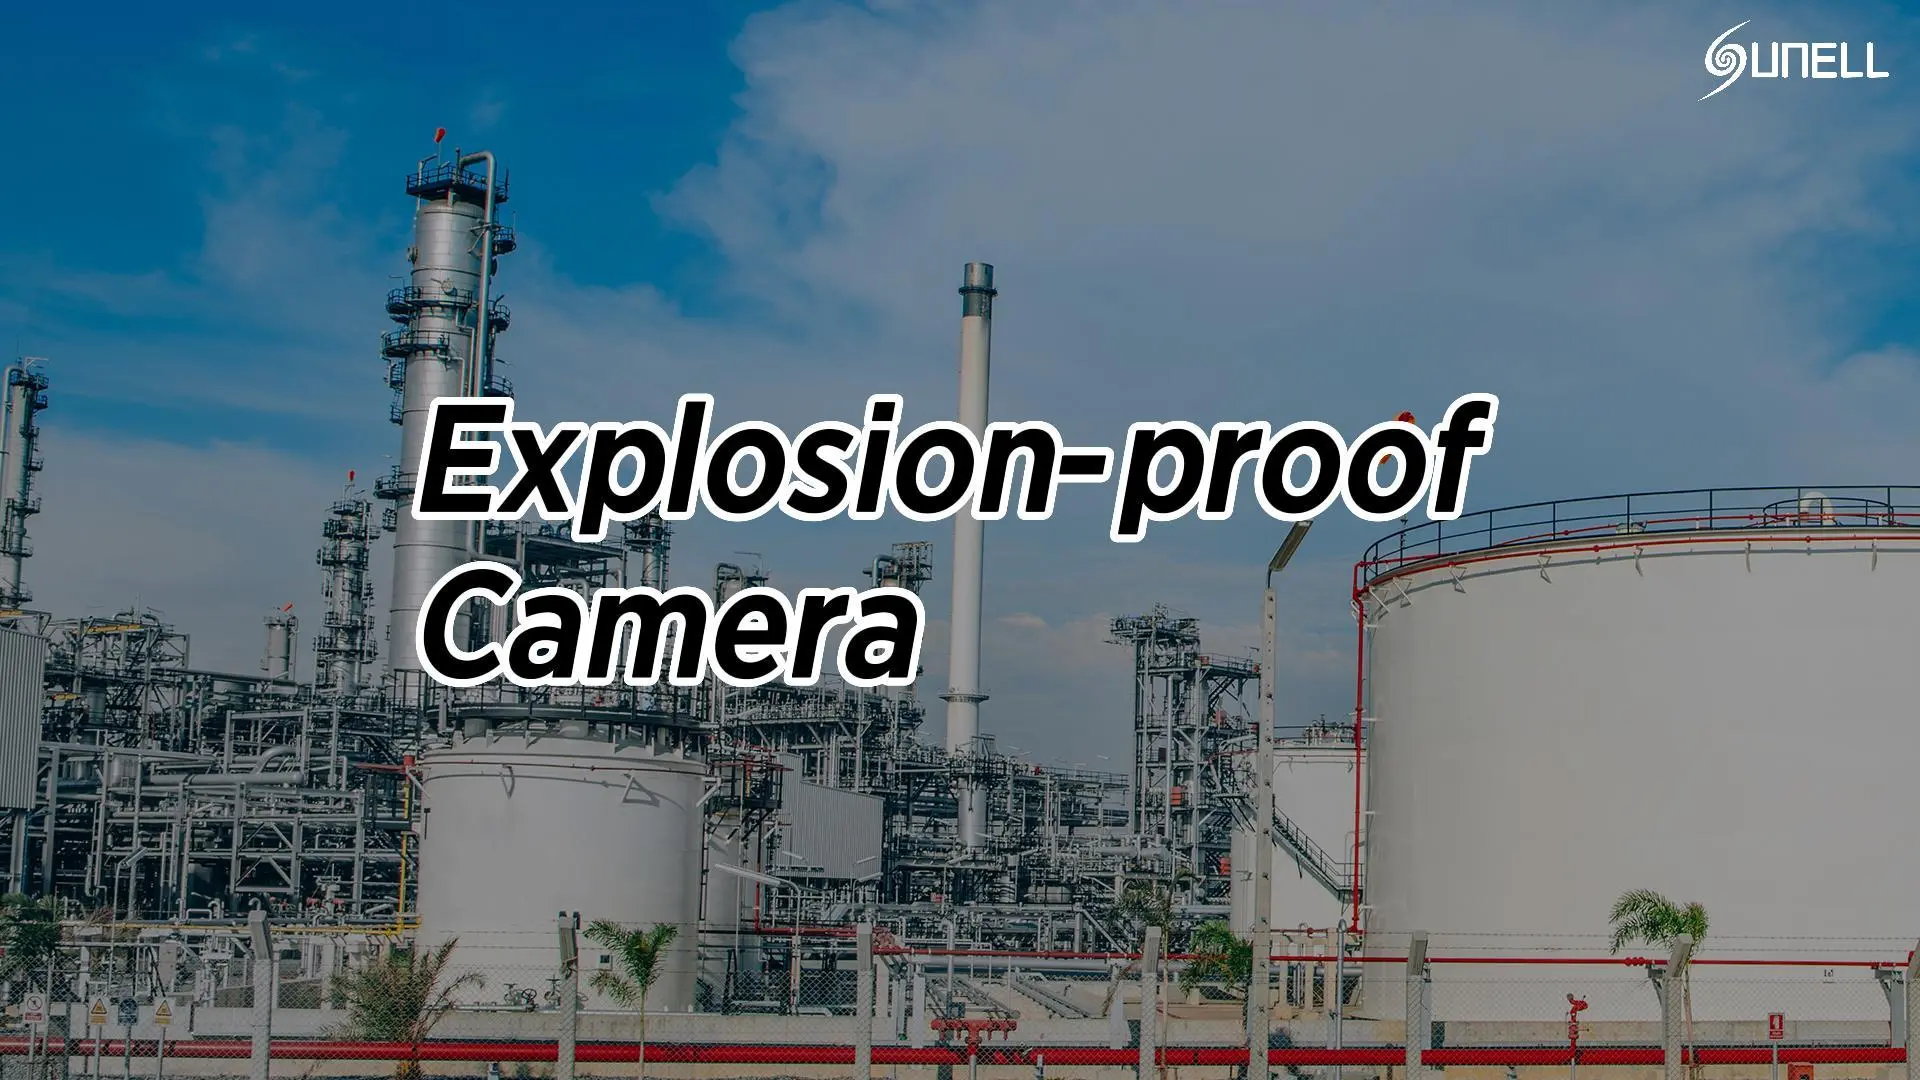 Introducing Sunell Explosion-proof Cameras